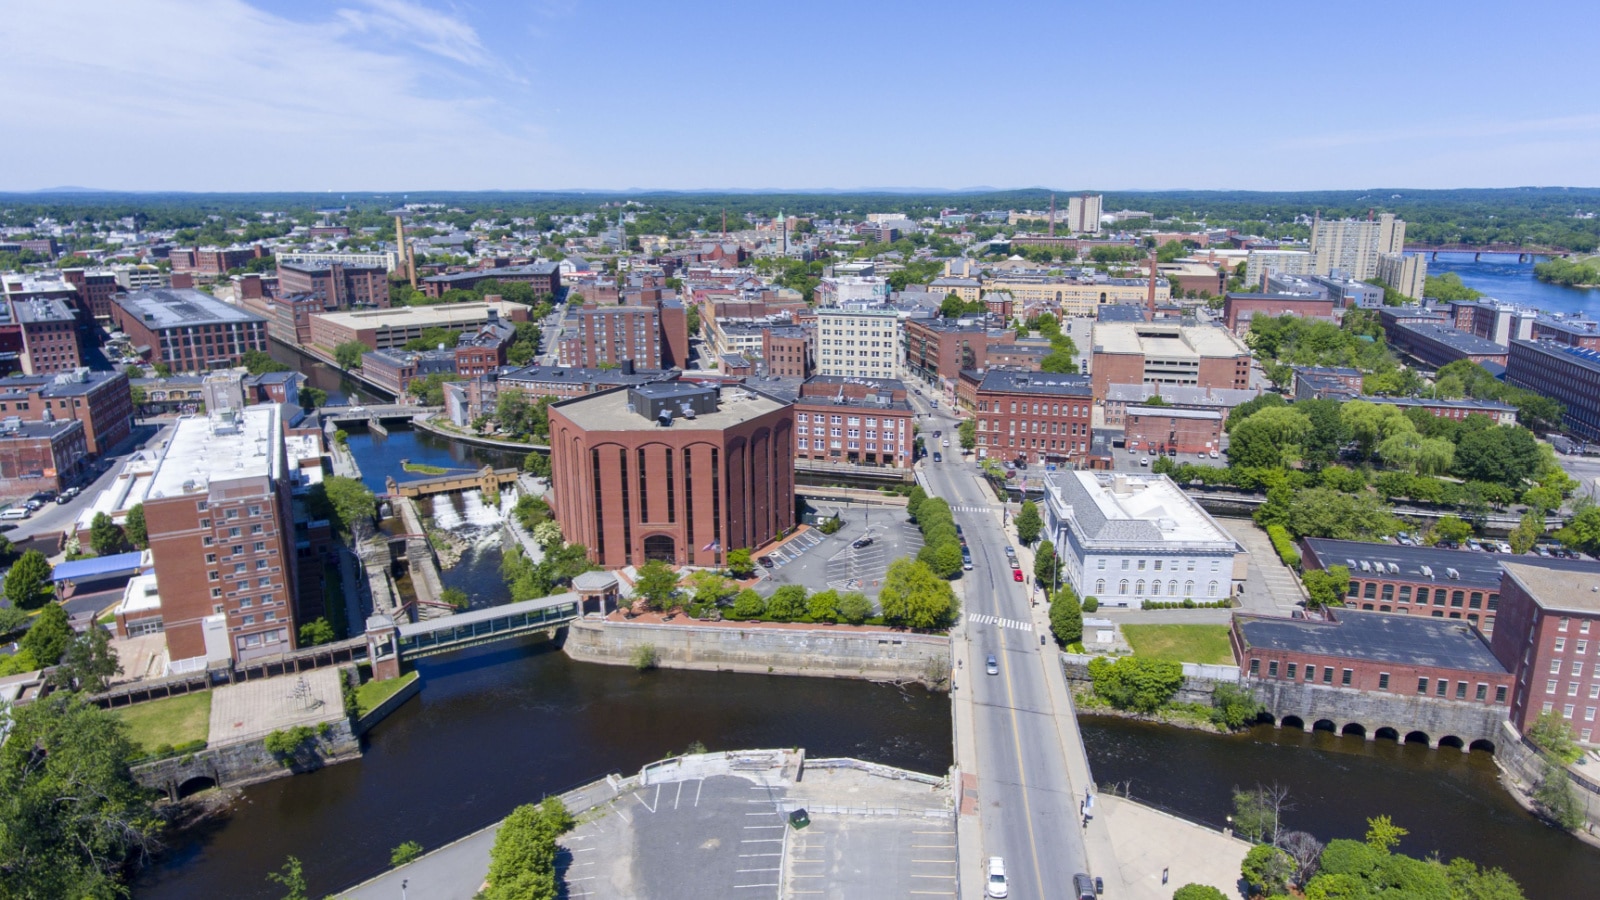 Lowell historic downtown and Concord River aerial view in Lowell, Massachusetts, USA.